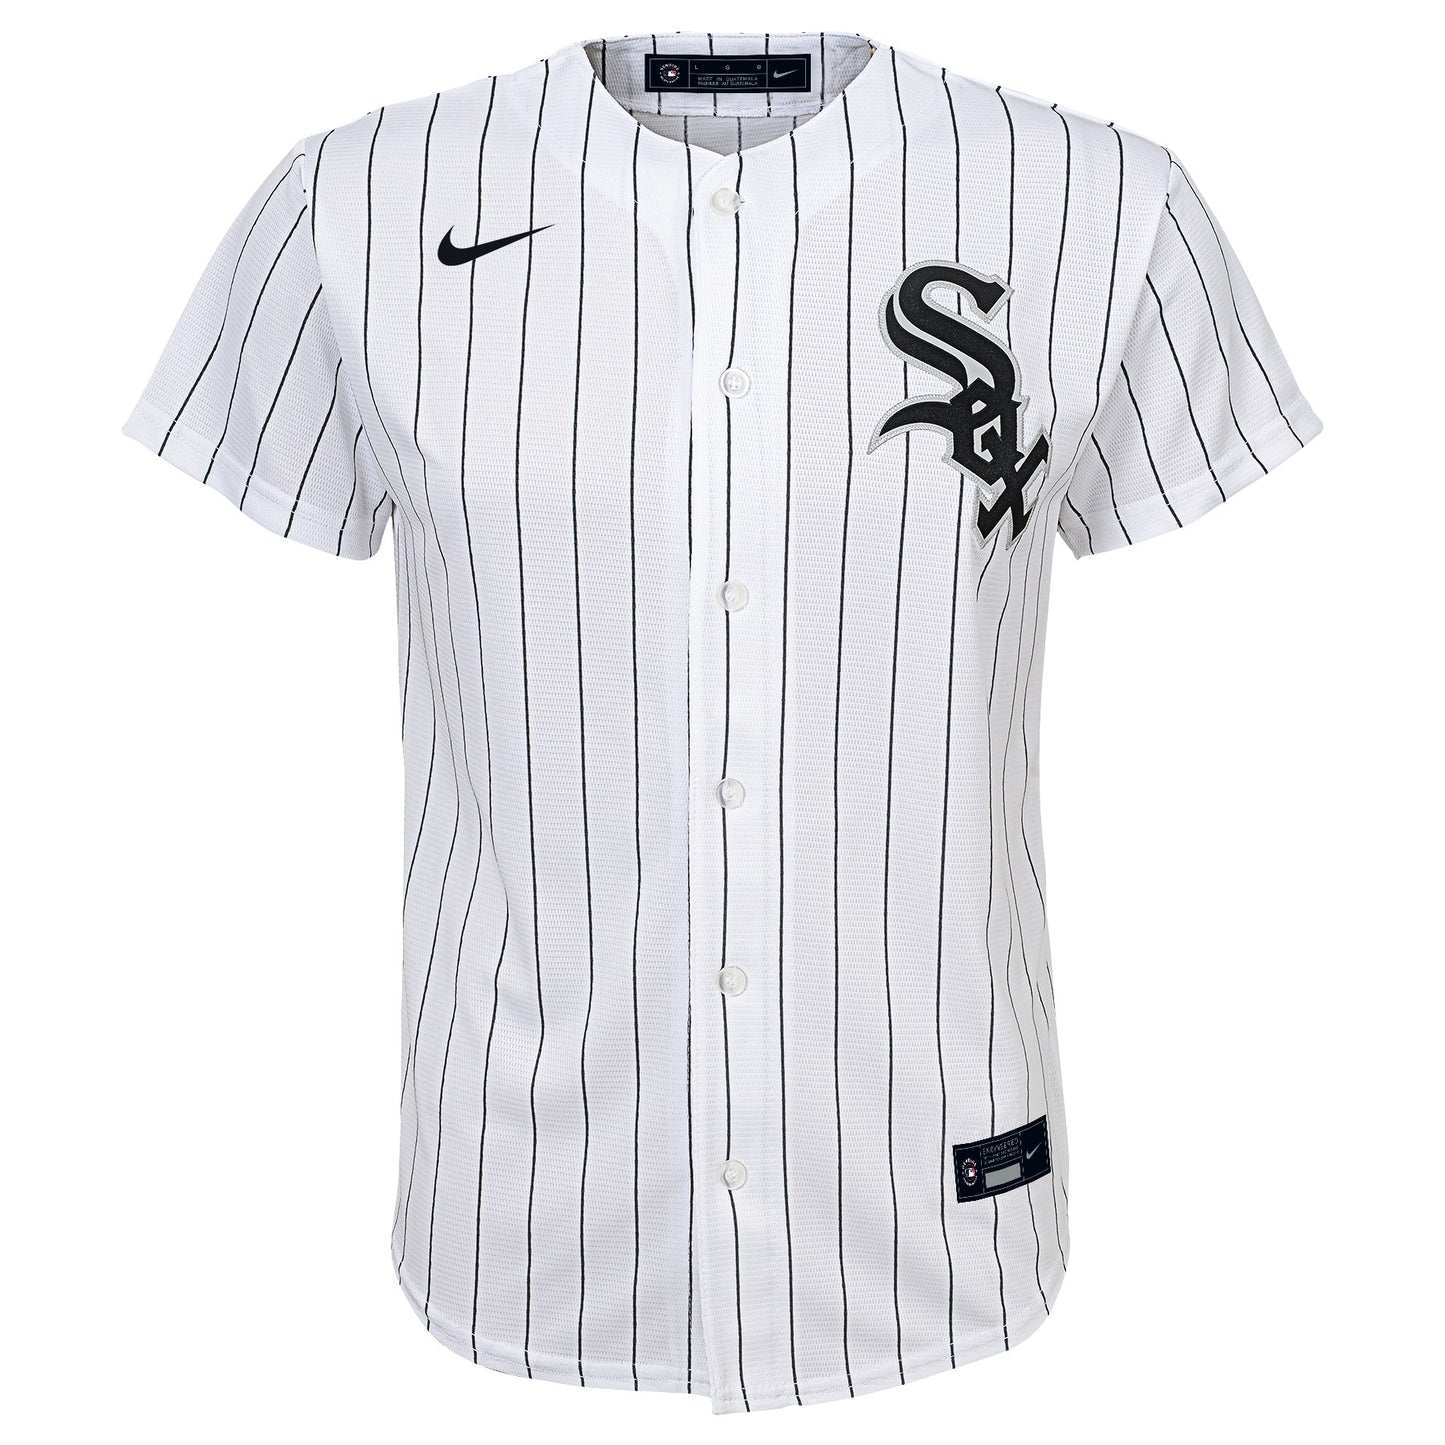 Infant Tim Anderson Chicago White Sox Nike Home White Replica Team Jersey